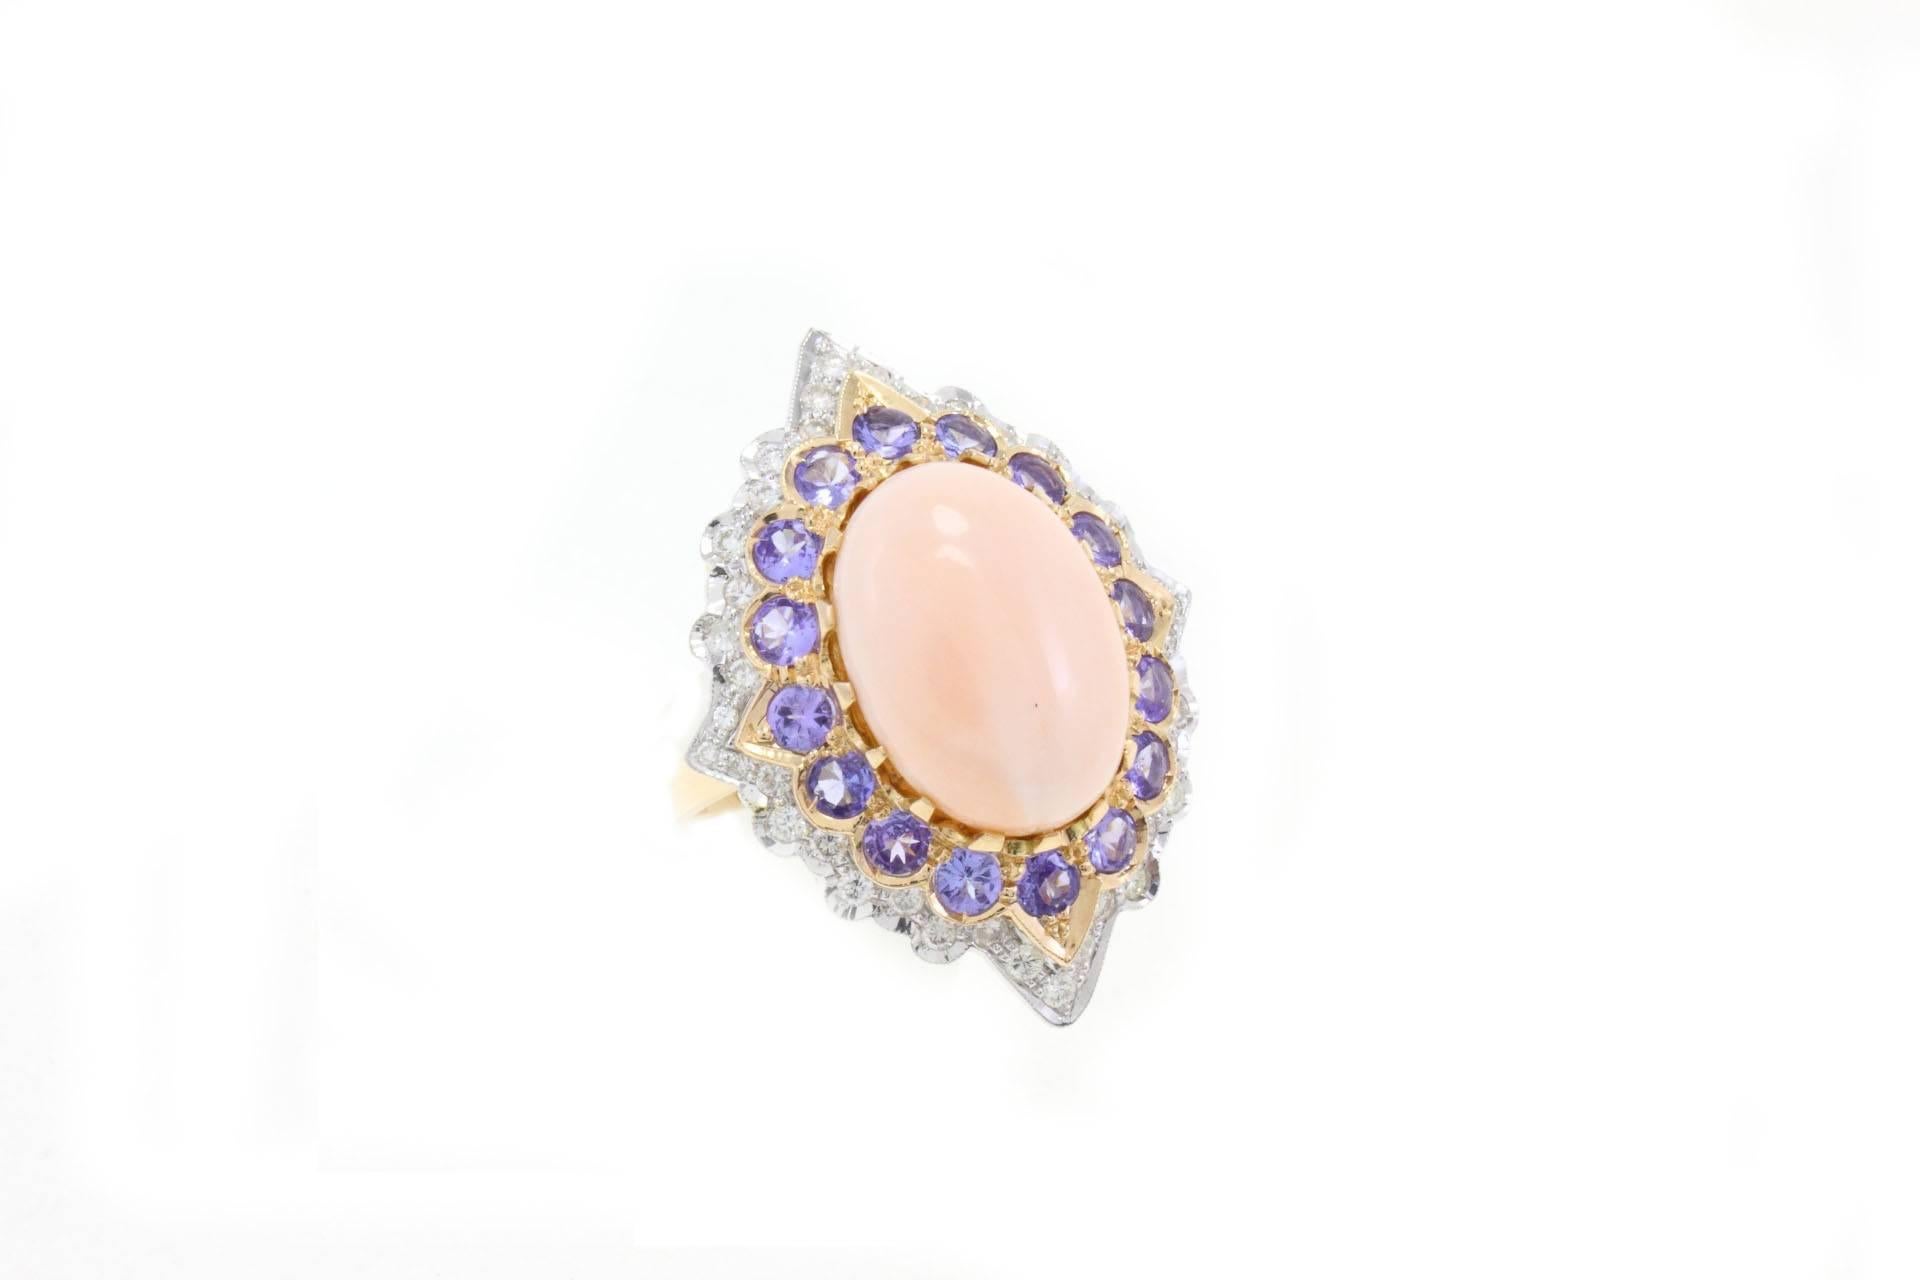 This ring is a triumph of femininity with its shades of pink and purple.
If you want to feel like a fairytale princess, this is the ring for you.
US size                                               Materials Details
width 1.02 inch             